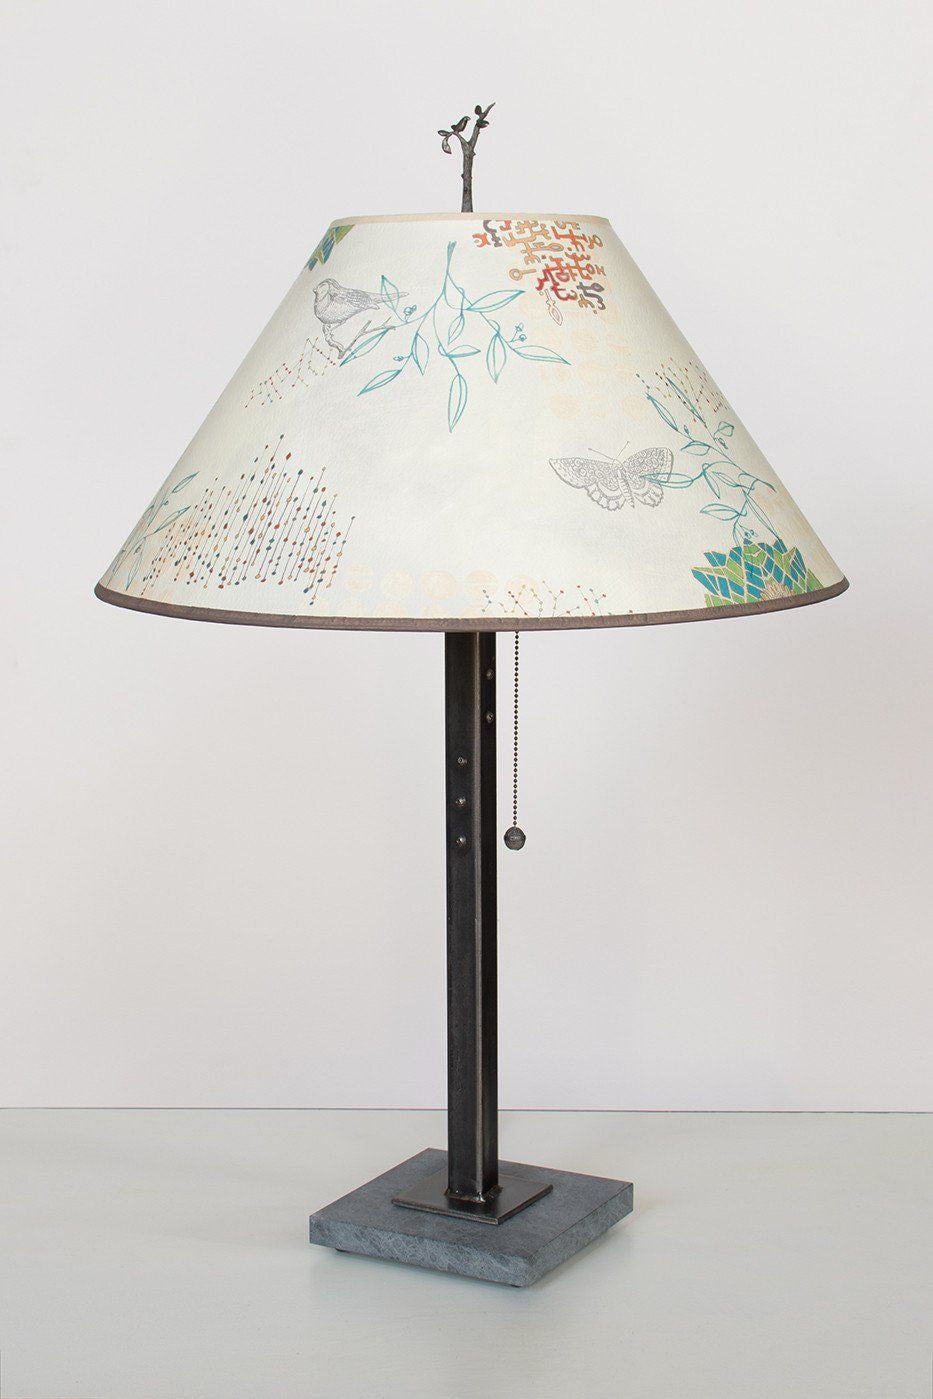 Steel Table Lamp with Large Conical Shade in Ecru Journey